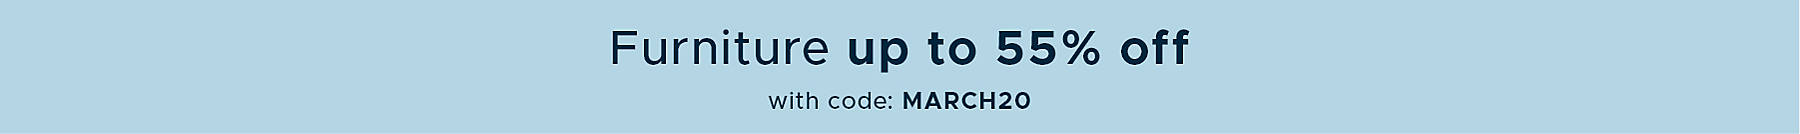 Furniture up to 55% off with code: MARCH20 this weekend only